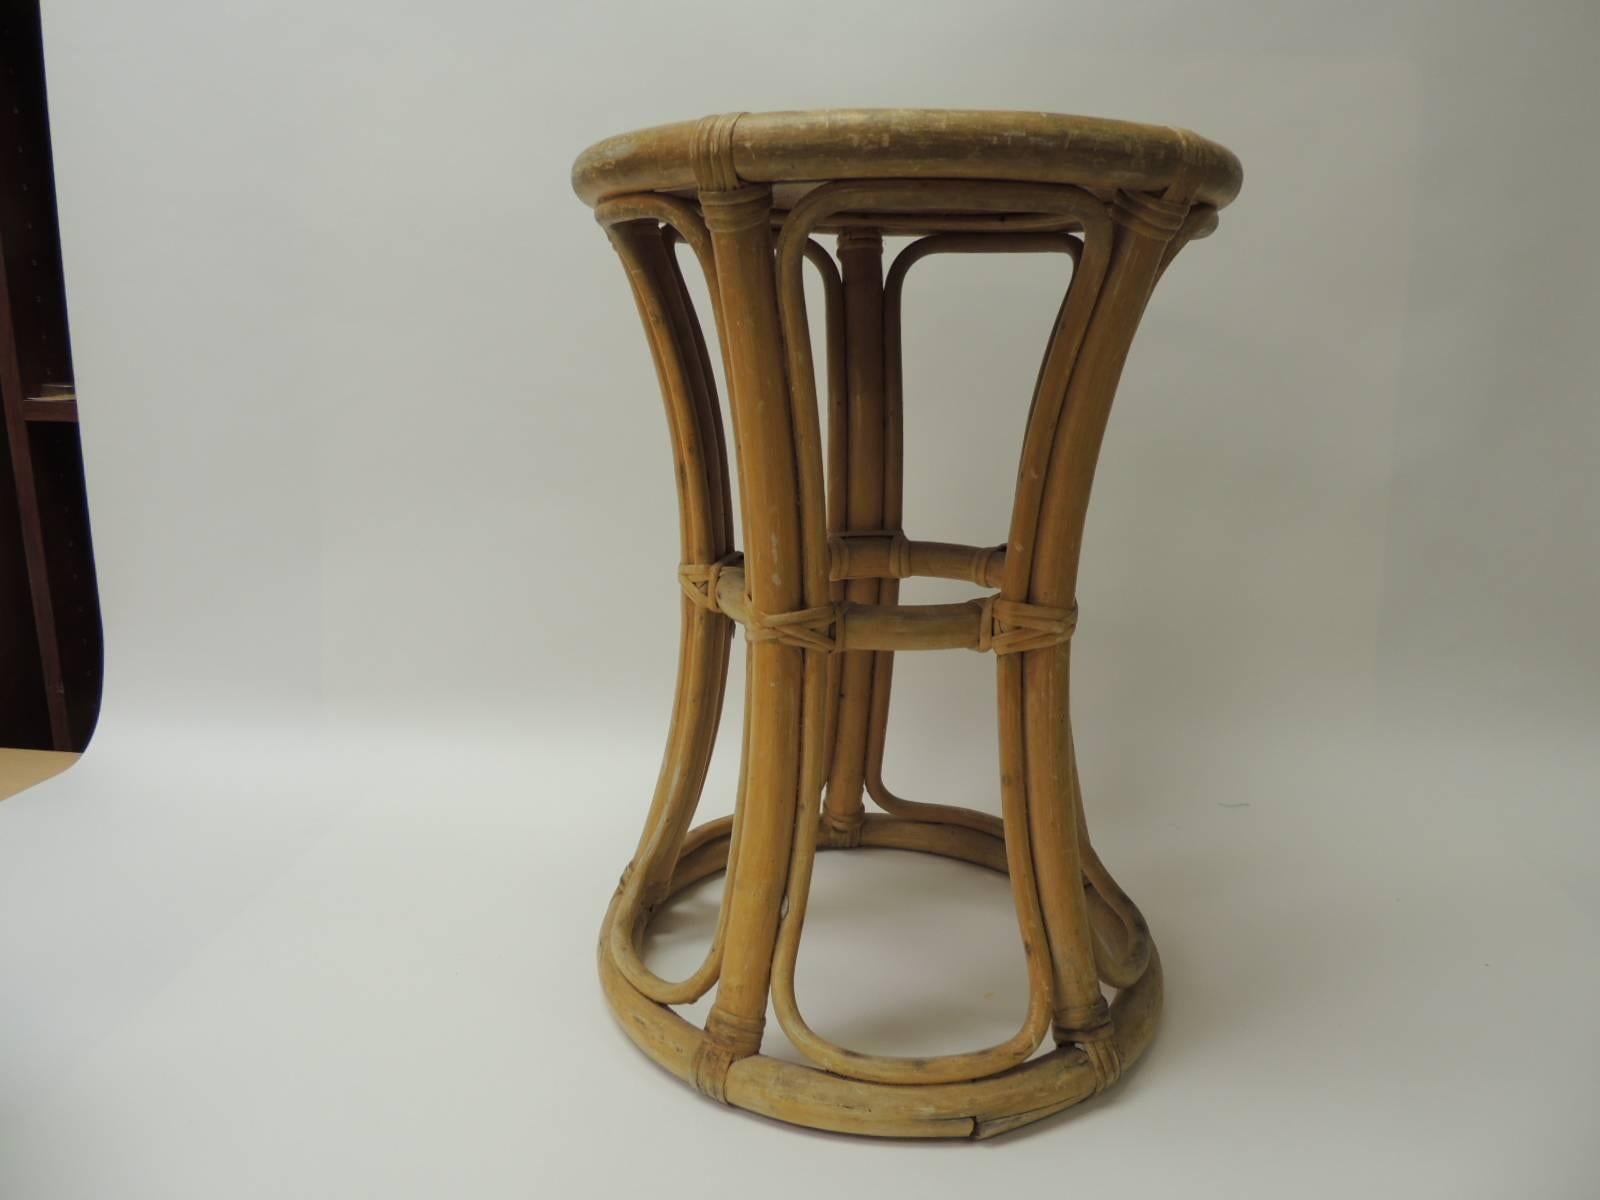 Vintage round bamboo and rattan side table with basket weave top details.
Undulating bent bamboo legs and rattan details.
Size: 14 x 18.5 H.